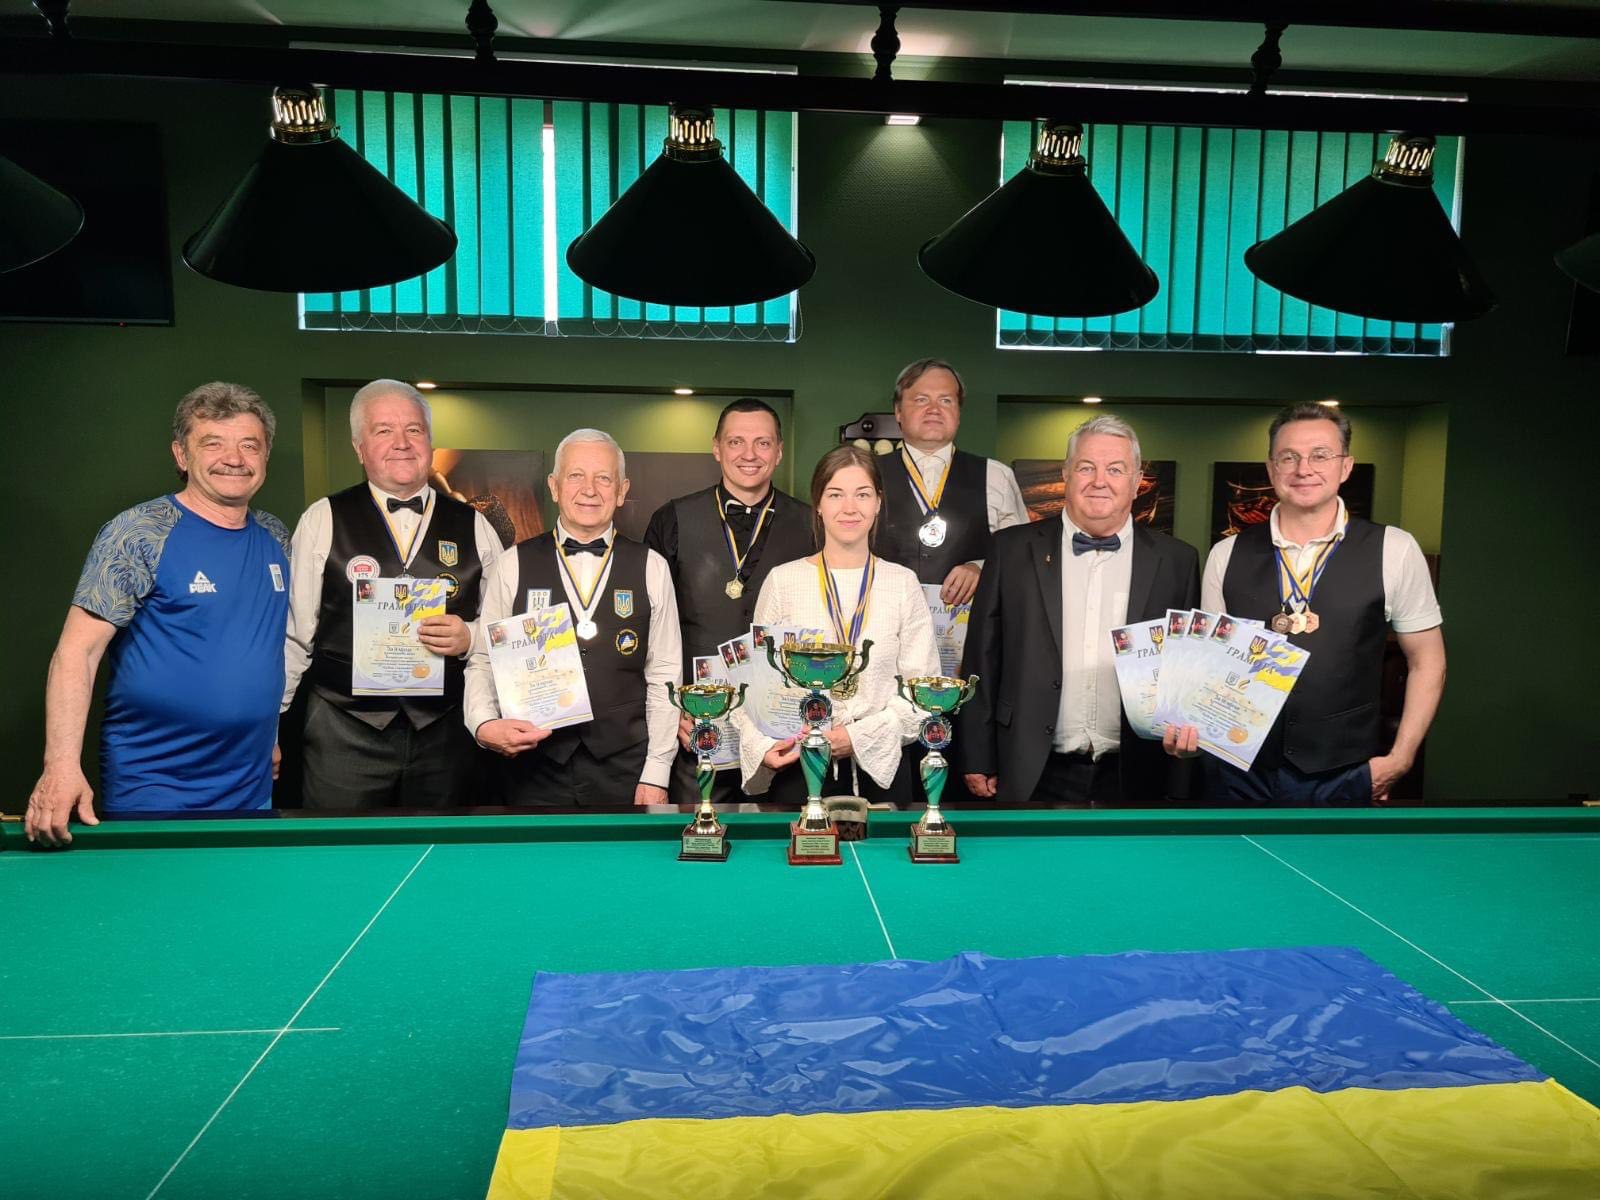 Poltava Polytechnic team becomes the gold medallist of the All-Ukrainian competition among academic workers of the HEI in the billiard sport “Dynamic Pyramid – Solo” – the Siniakevich Cup